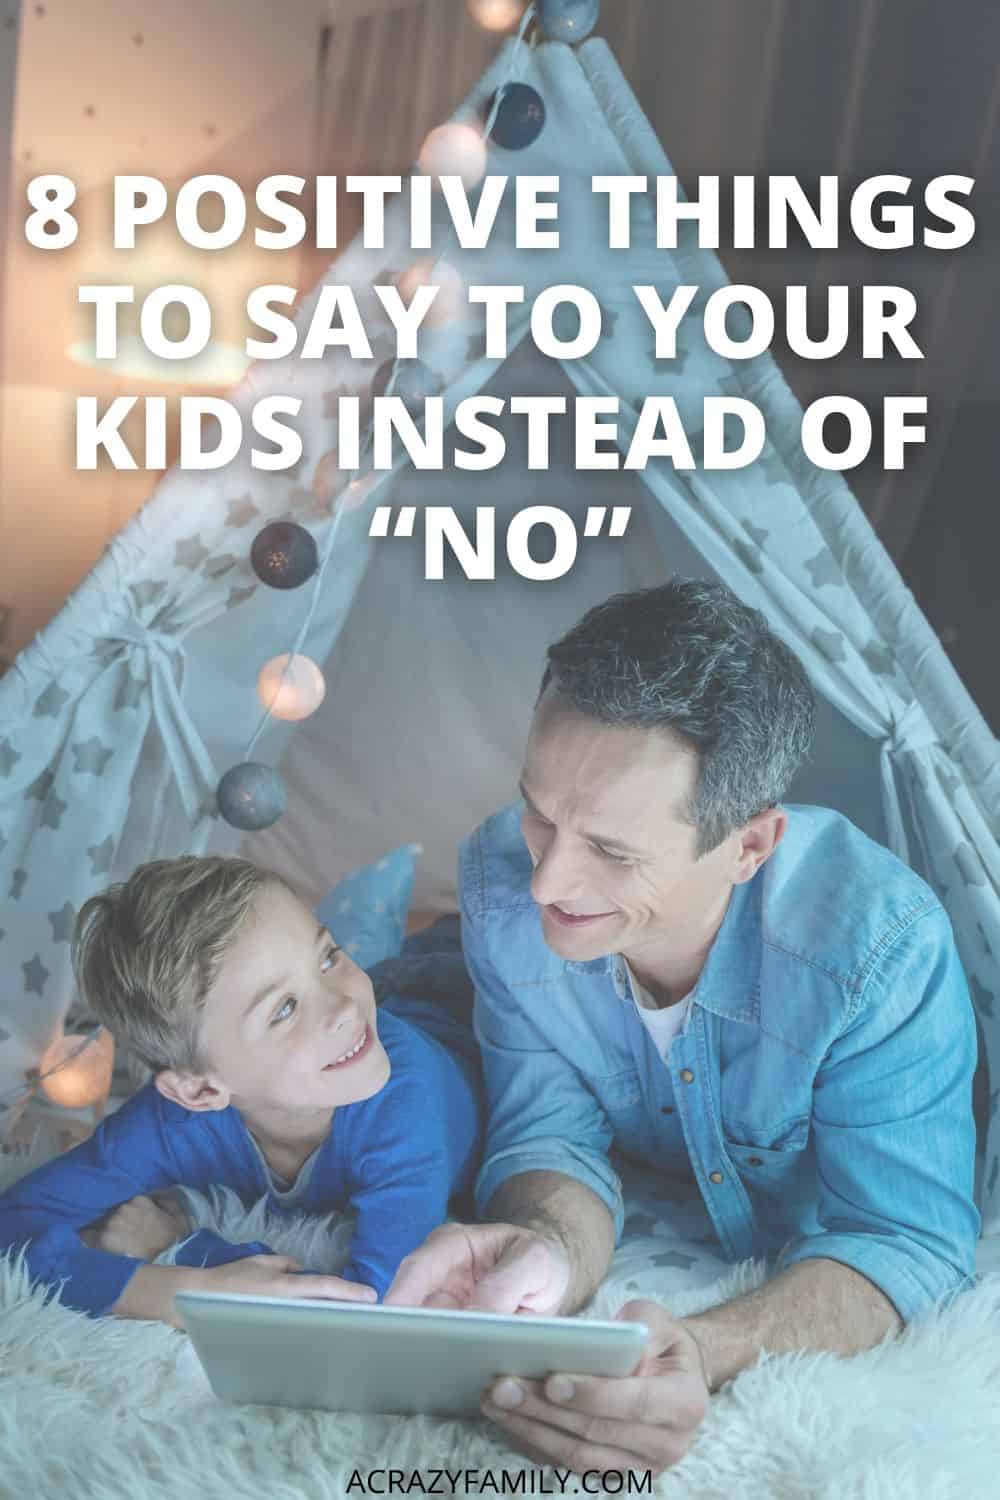 8 Positive Things to Say to Your Kids Instead of “NO”